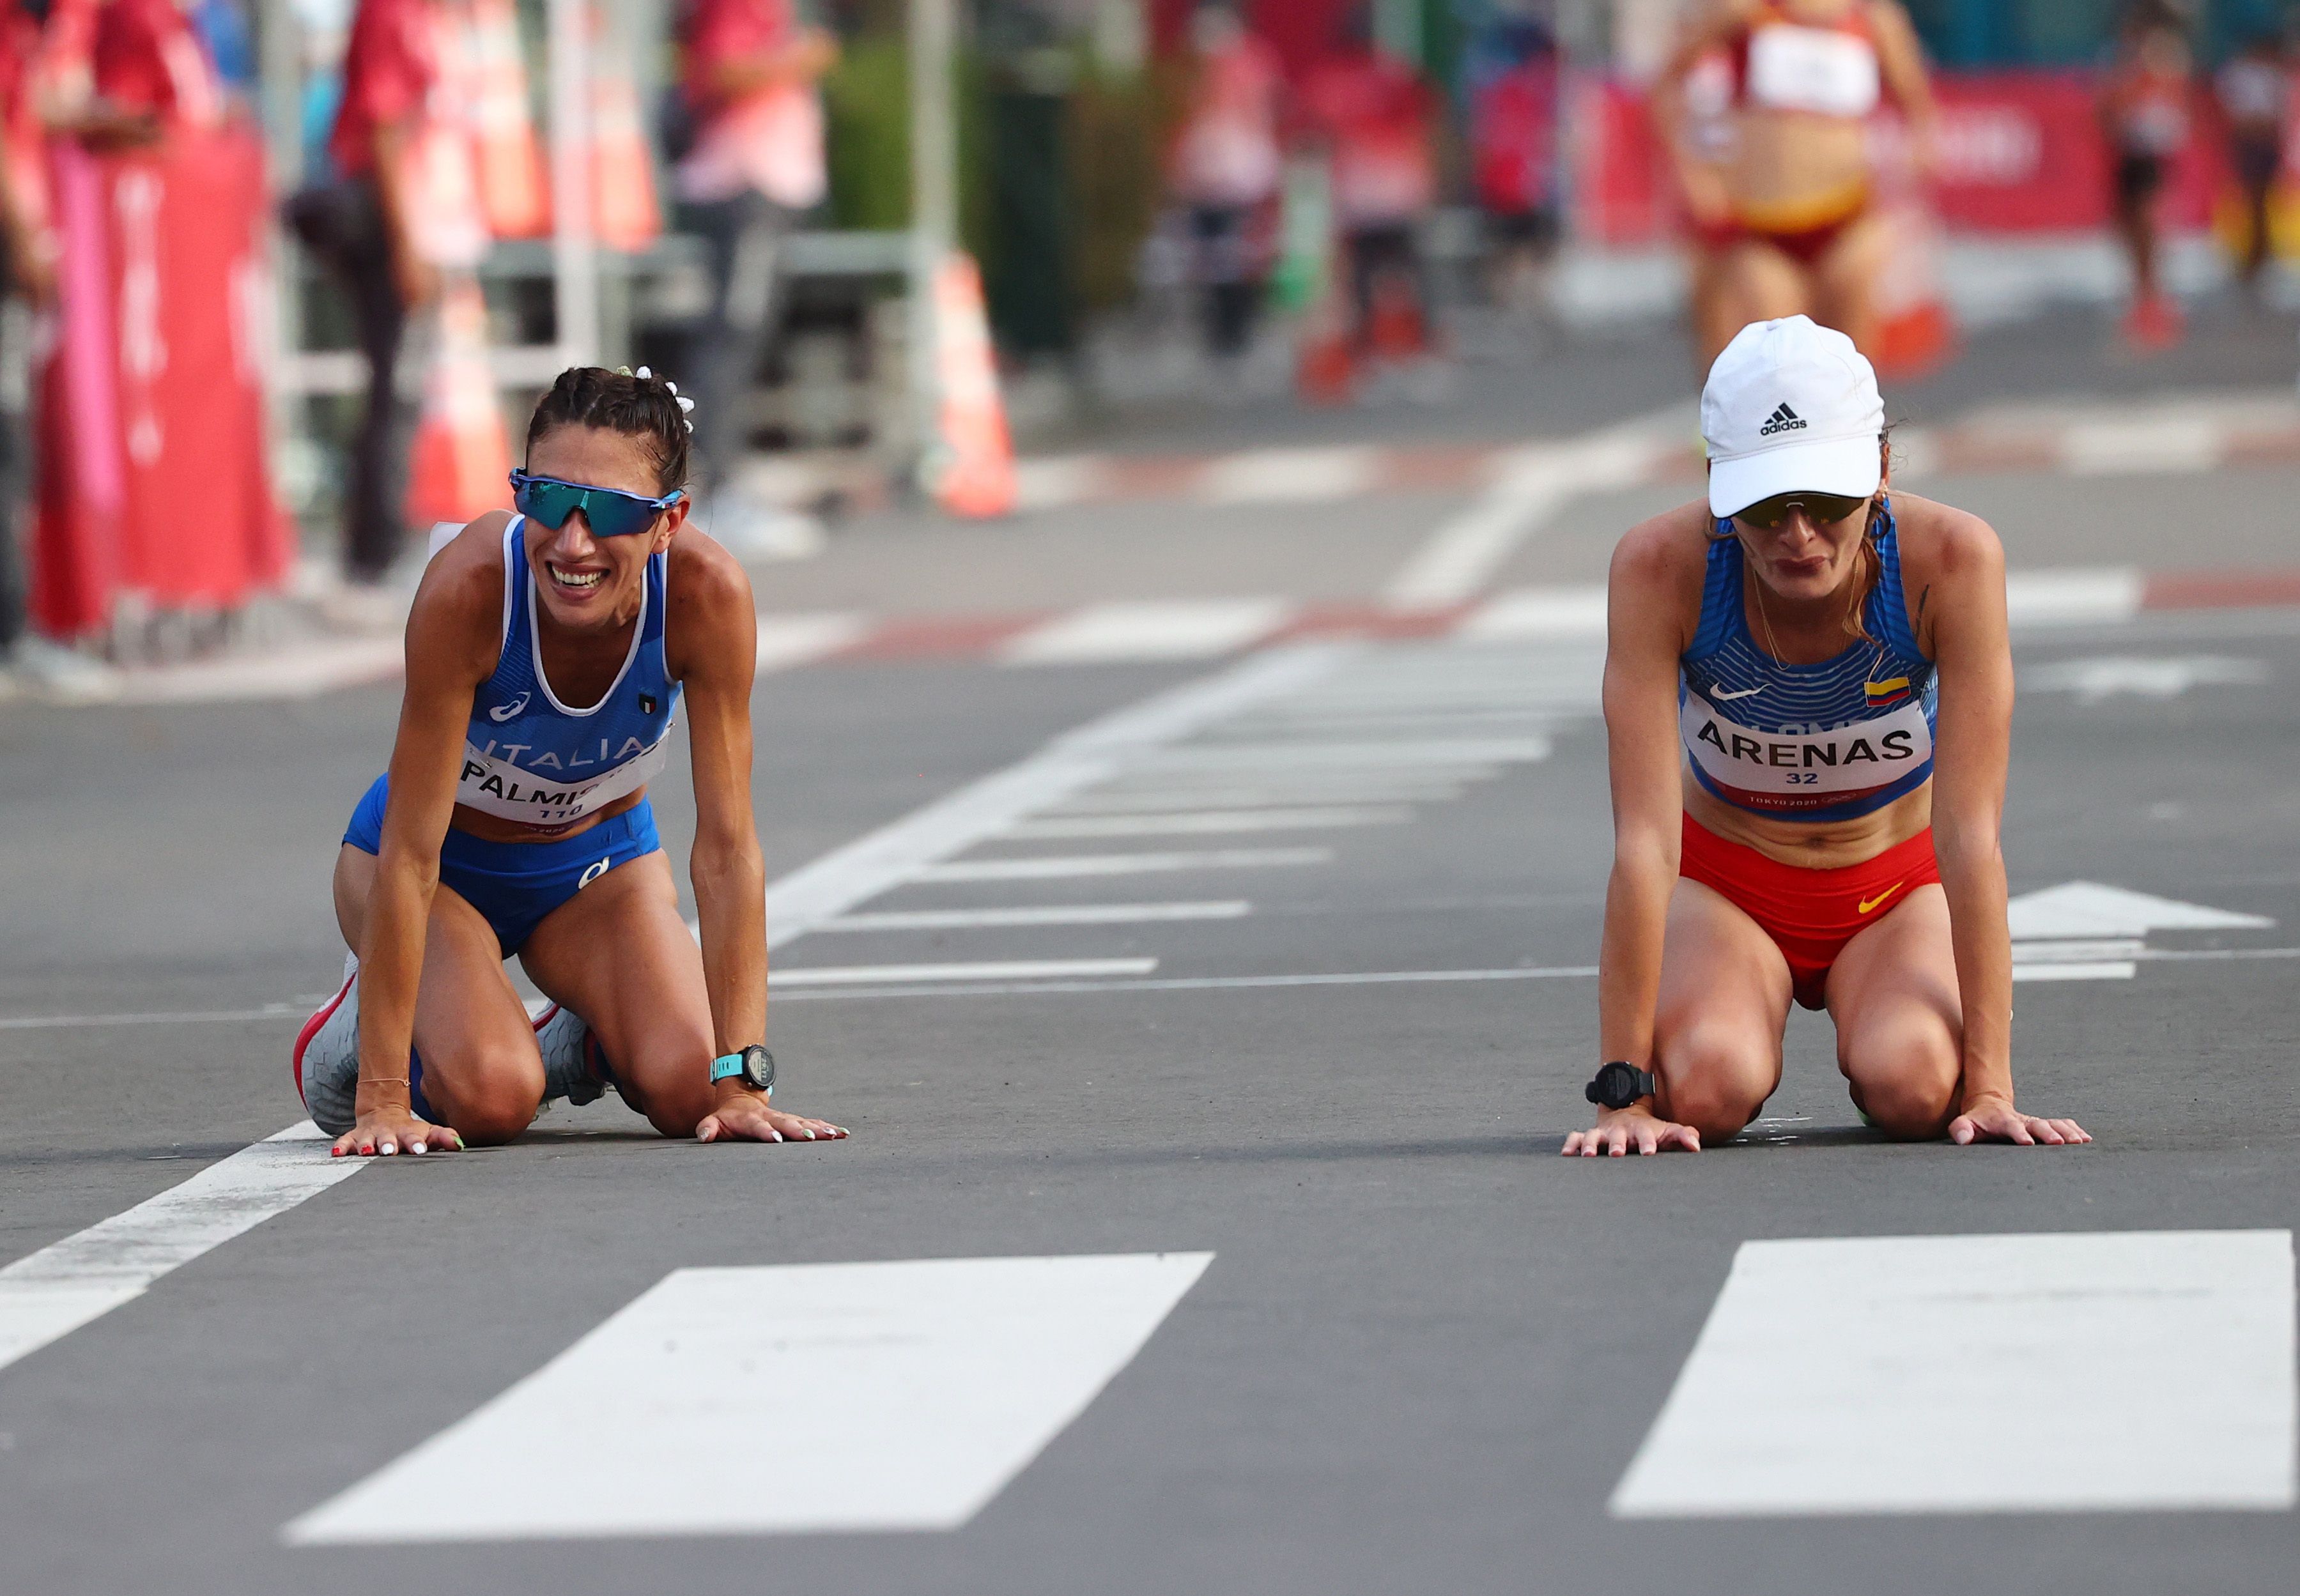 Tokyo 2020 Olympics - Athletics - Women's 20km Walk - Sapporo Odori Park, Sapporo, Japan - August 6, 2021. Gold medallist, Antonella Palmisano of Italy and silver medallist, Sandra Arenas of Colombia react after the race REUTERS/Feline Lim